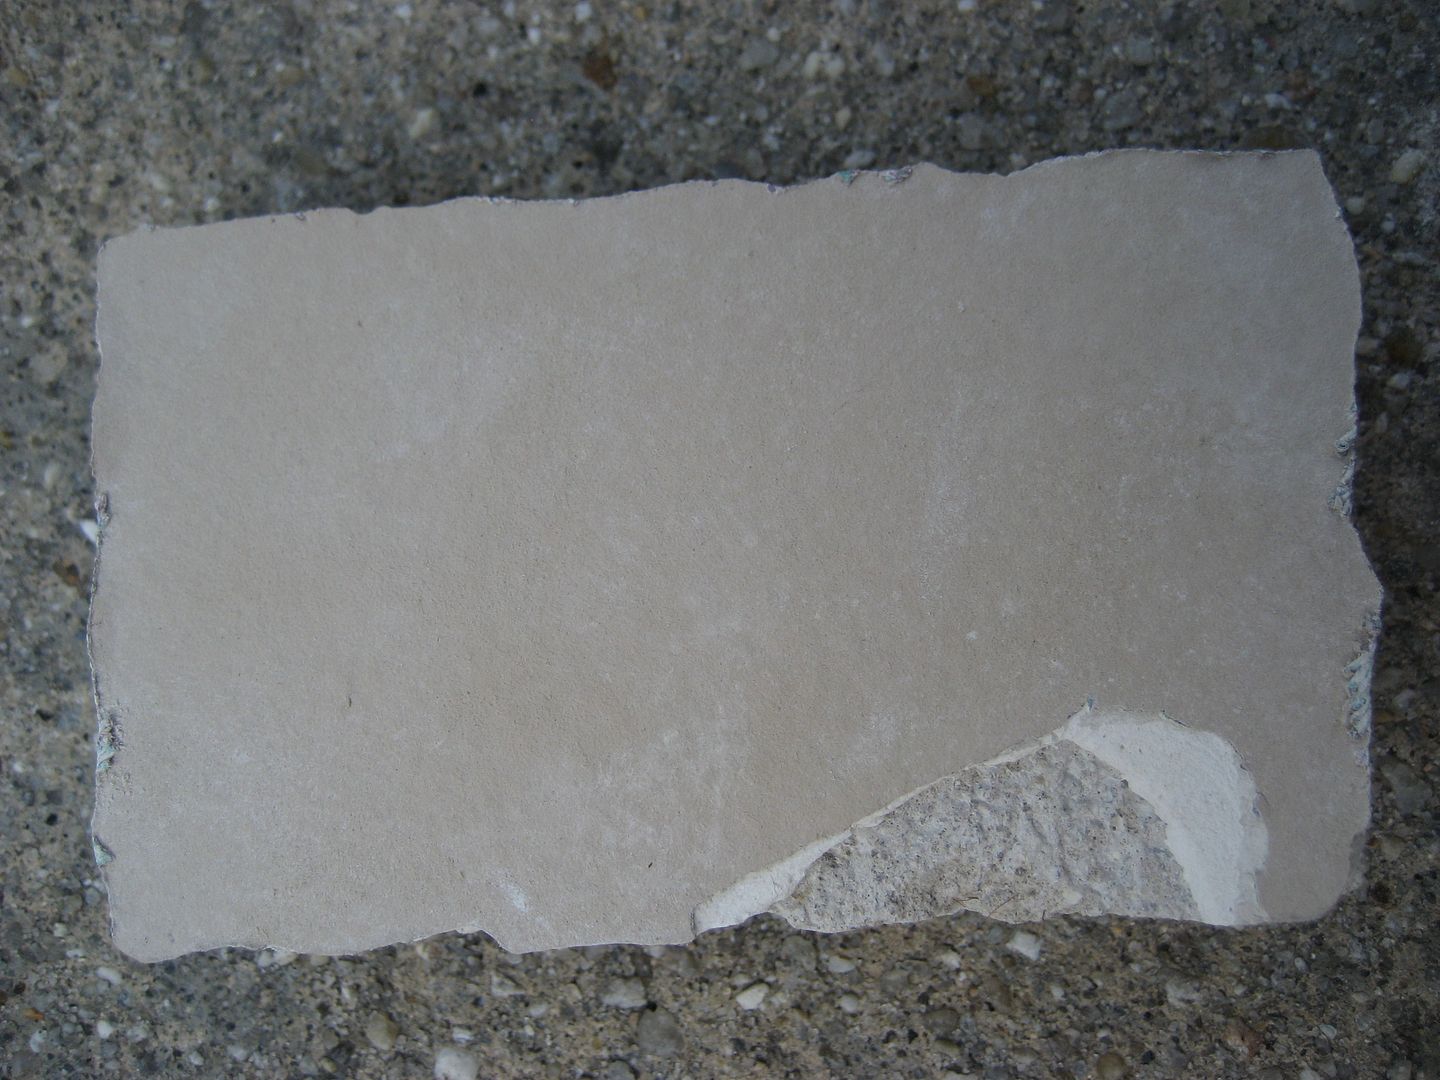 In fact, its a chunk of plaster that was cut out of a wall. 